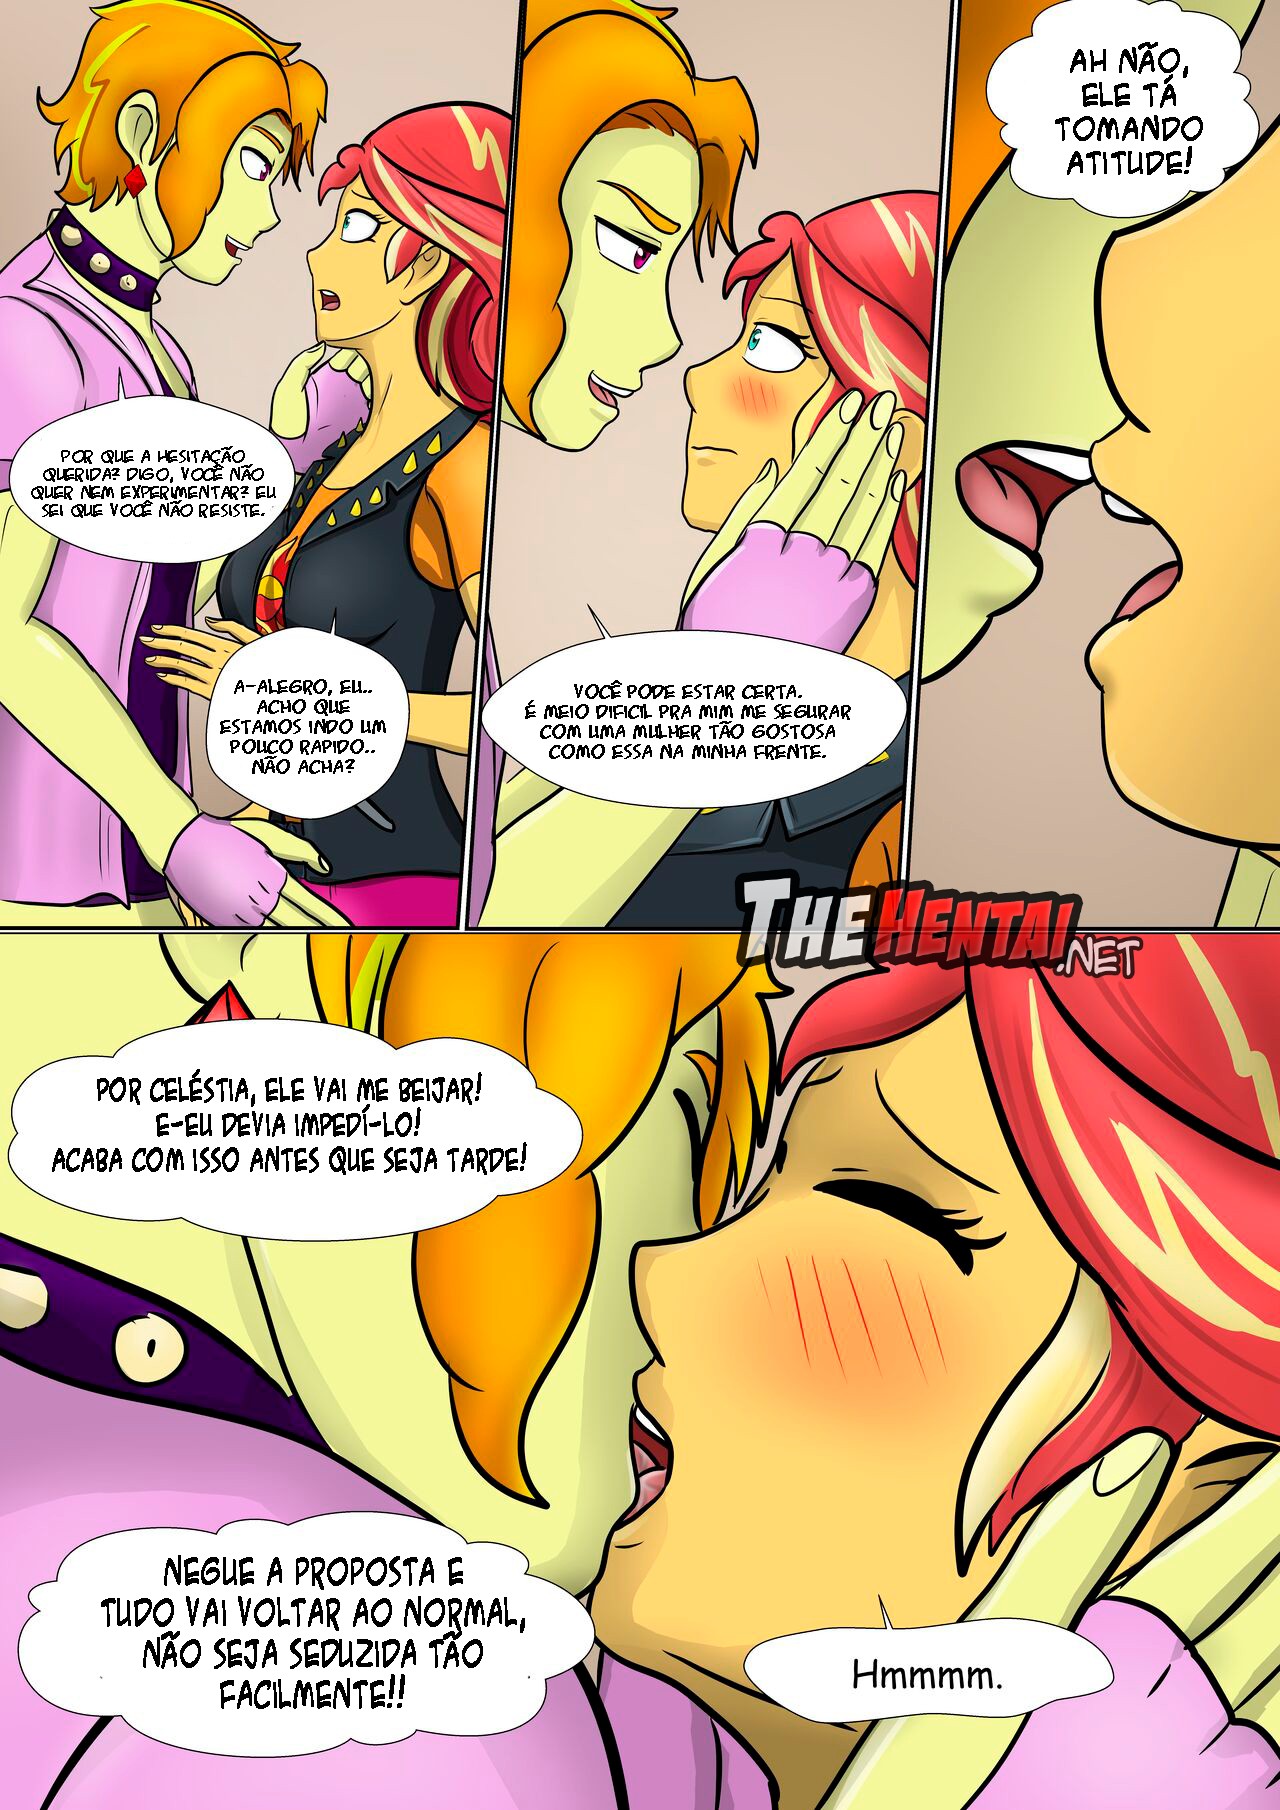 Sunsets Dilemma With Adagio Hentai pt-br 04